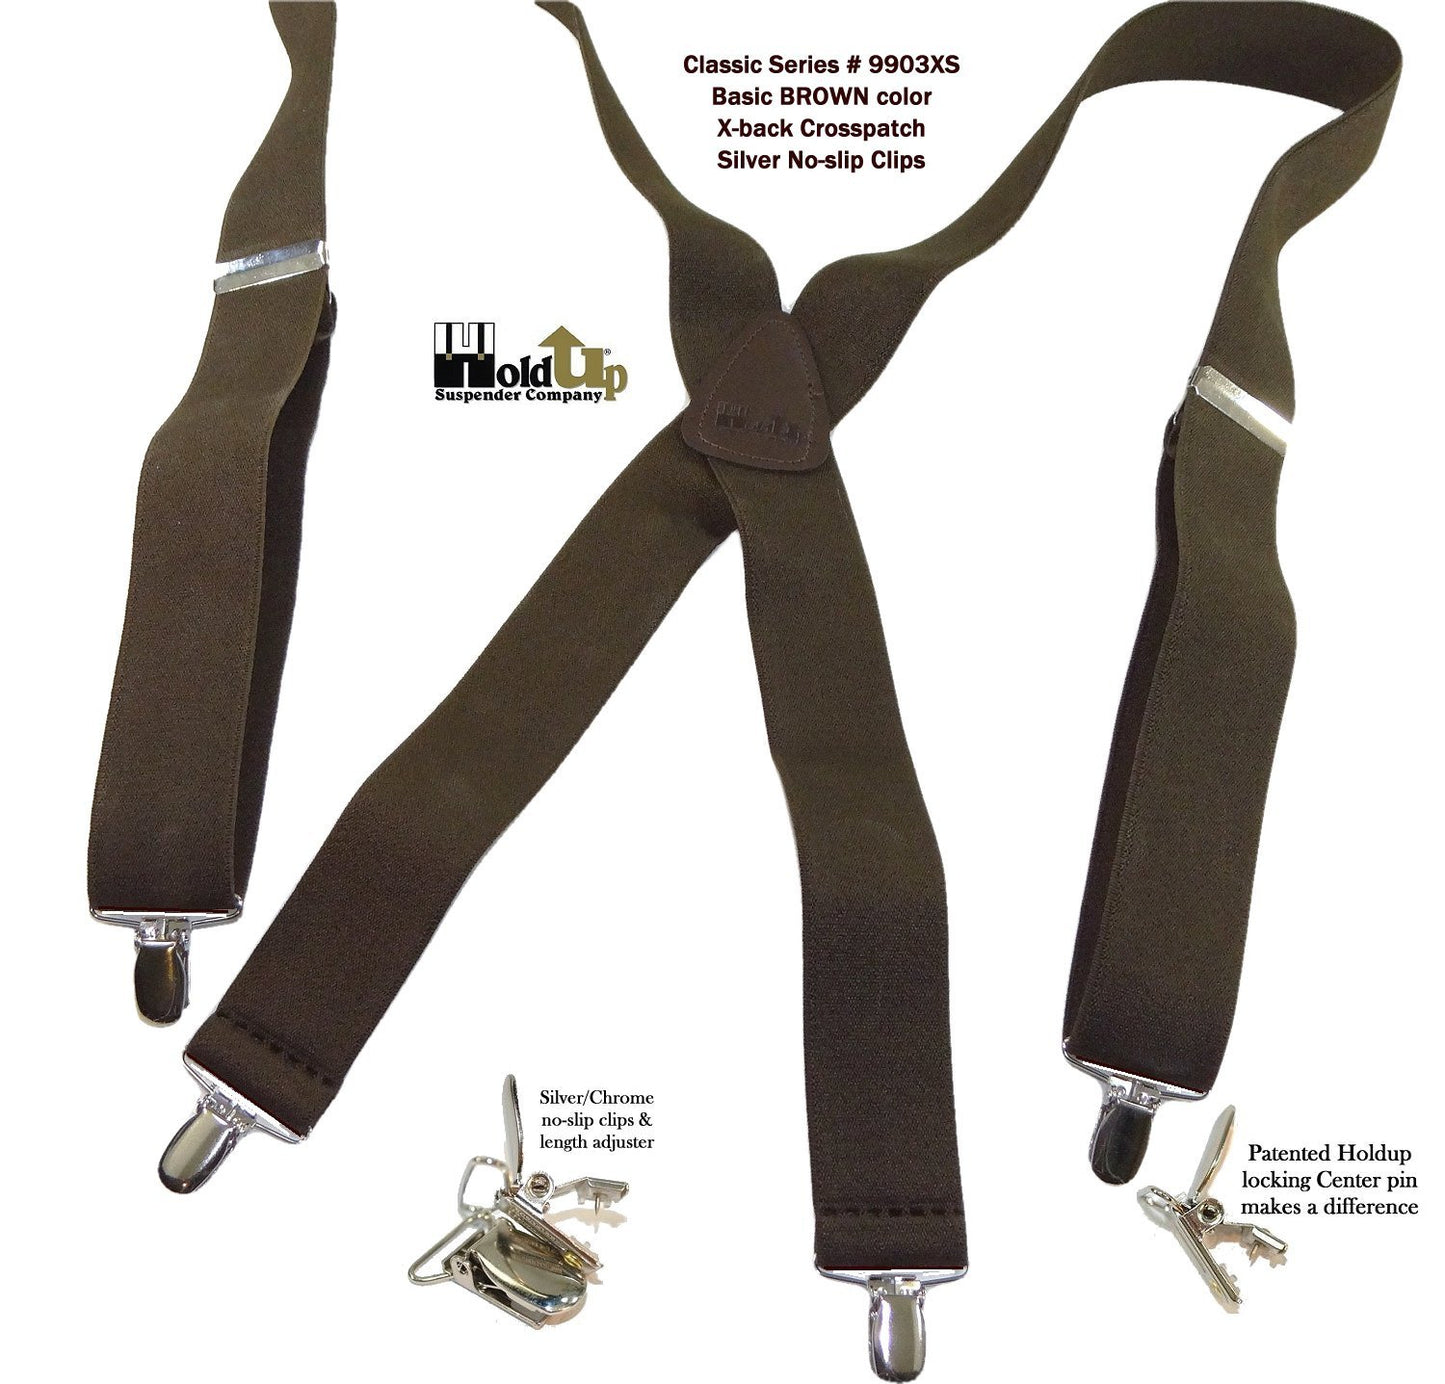 Hold-Ups Classic Dark Brown Suspenders with Silver No-slip Clips and X-back Leat